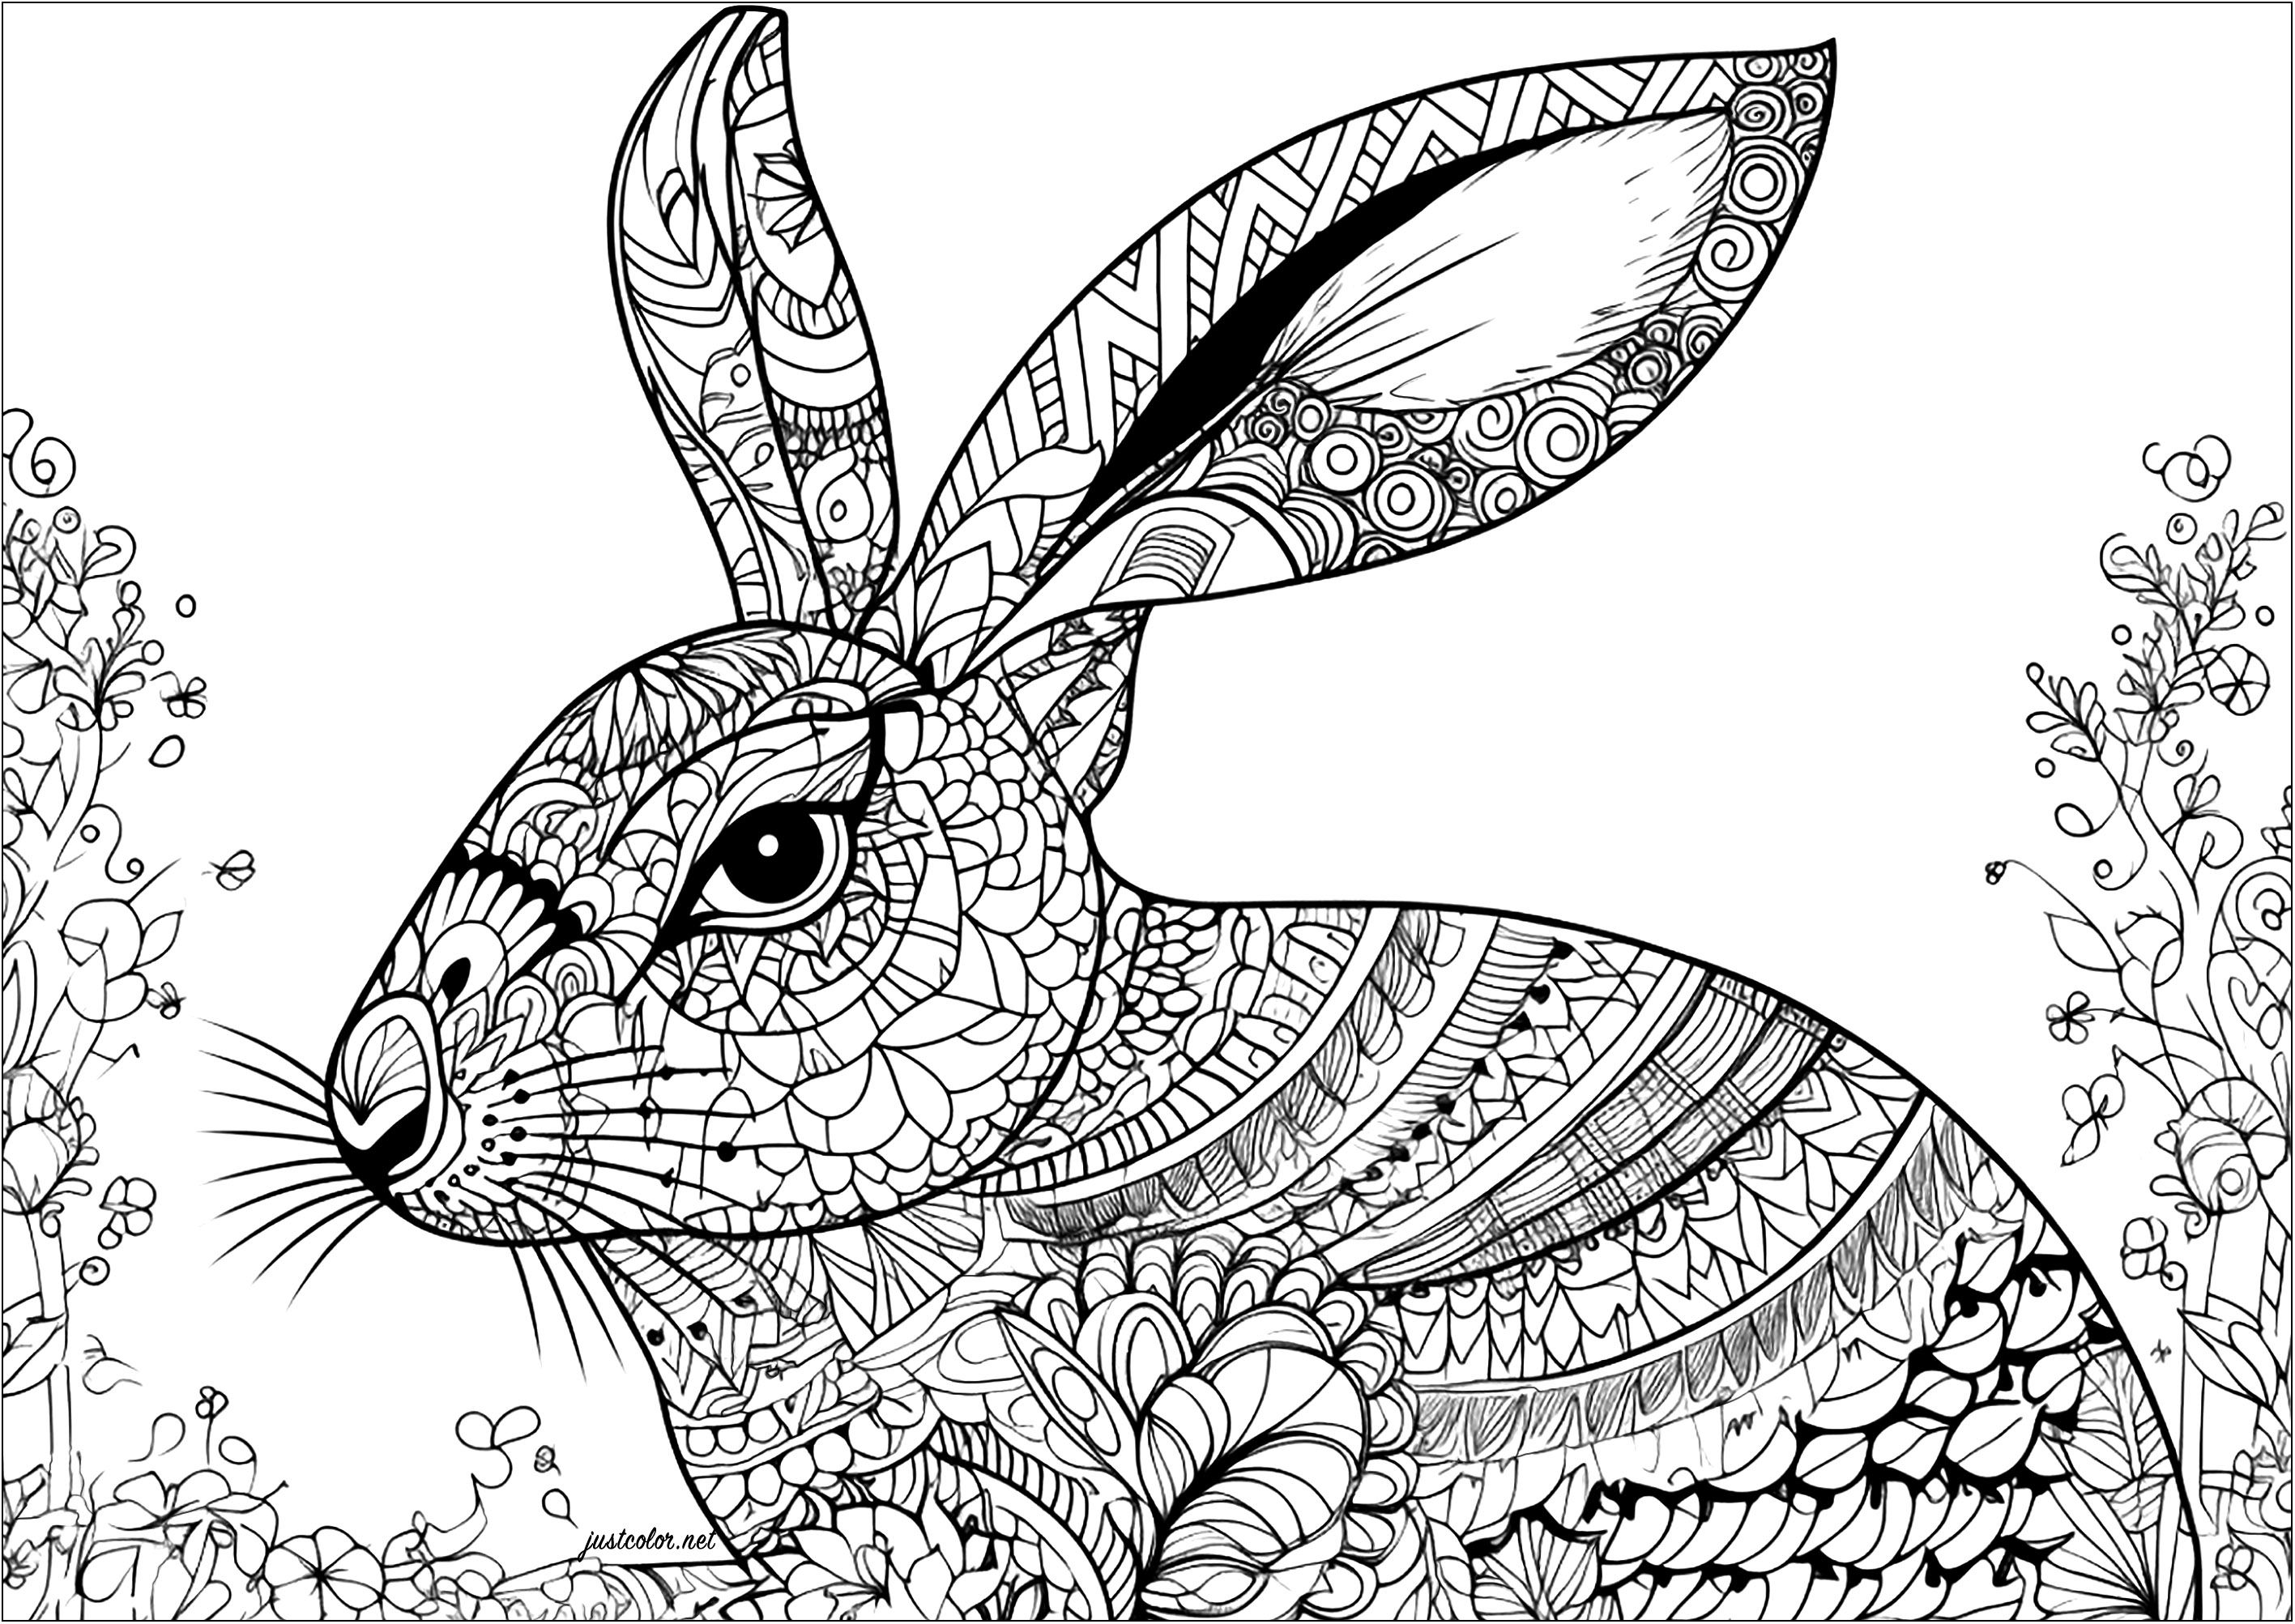 Coelho realista com padrões bonitos - Coelhos - Coloring Pages for Adults